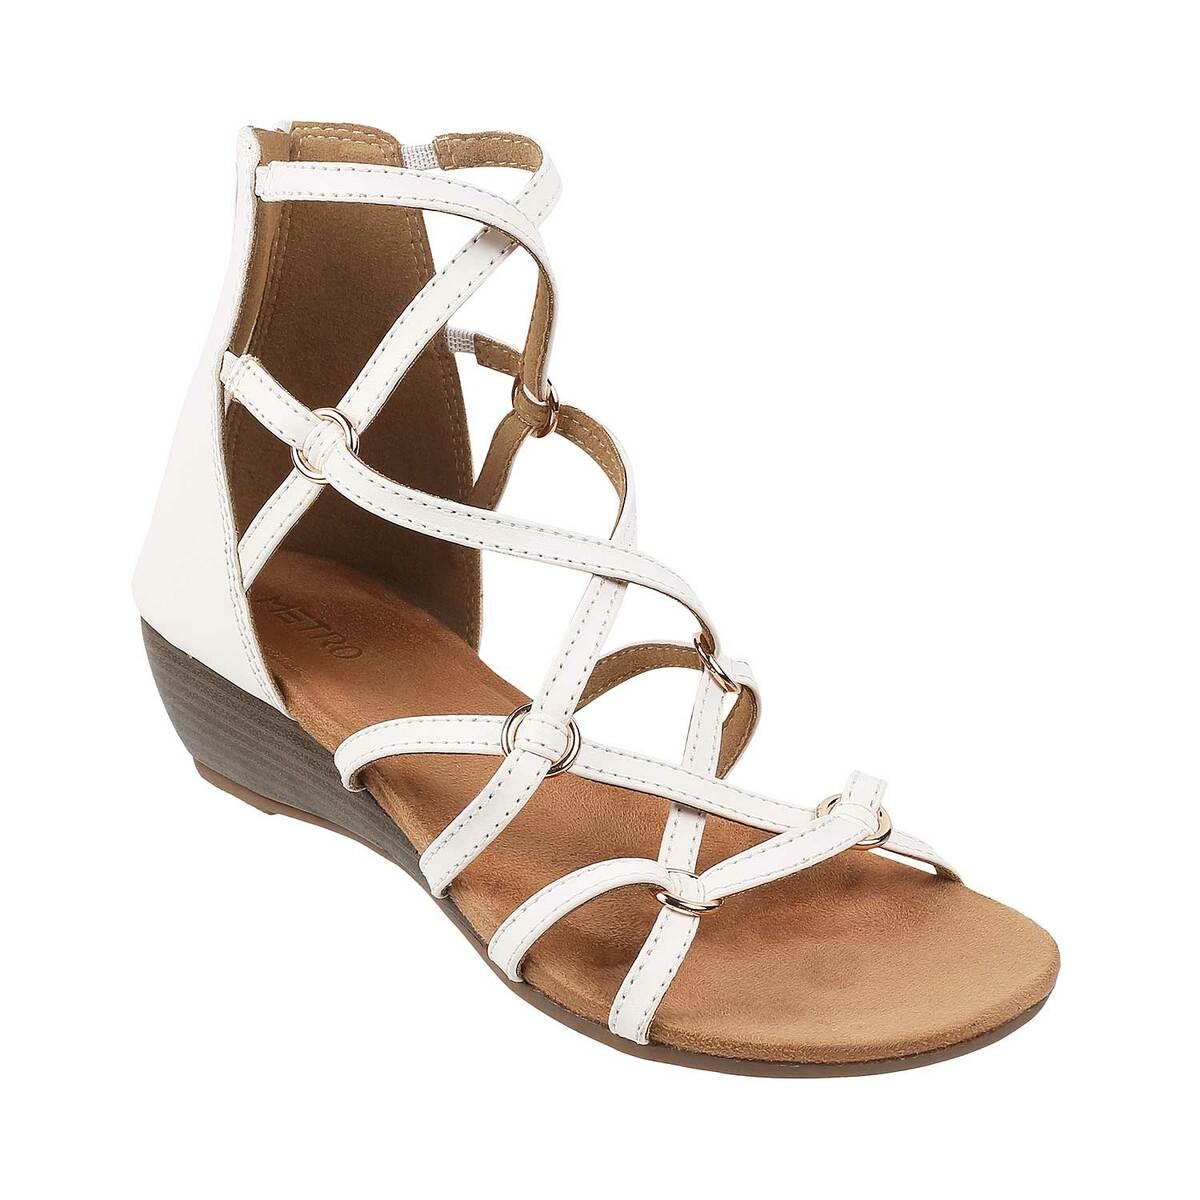 15 Best Shoes to Wear with White Dress & Over 9 Great Shoe Styles | Gold gladiator  sandals, Stylish flat shoes, Gladiator style sandals